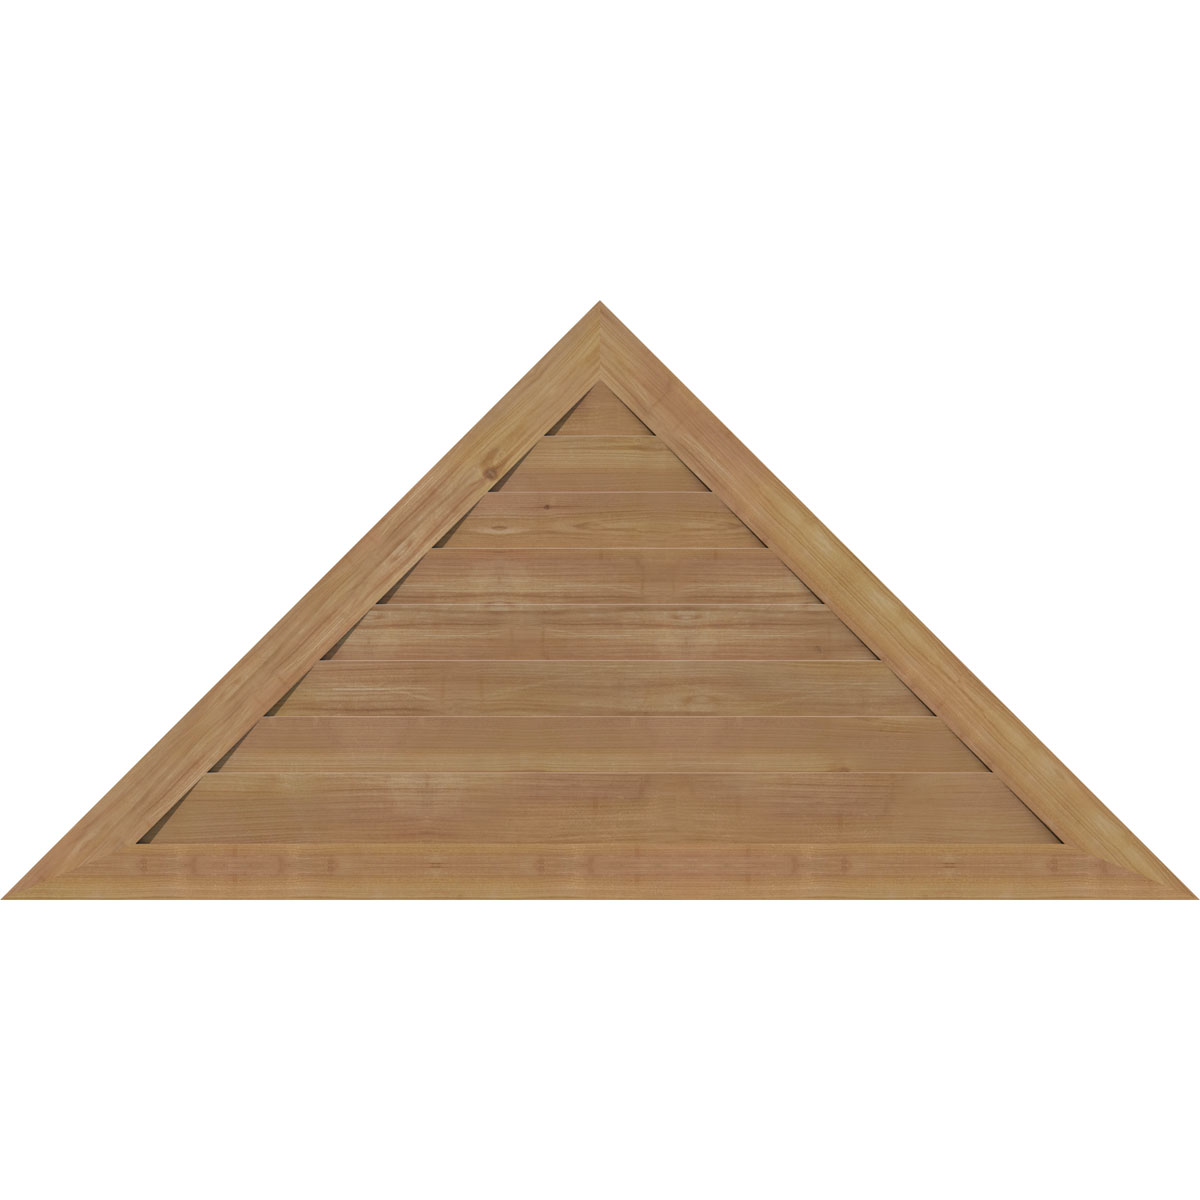 84"W X 38 1/2"H Triangle Gable Vent (96 7/8"W X 44 3/8"H Frame Size) 11/12 Pitch: Unfinished, Non-Functional, Smooth Western Red Cedar Gable Vent W/ Decorative Face Frame - image 4 of 12